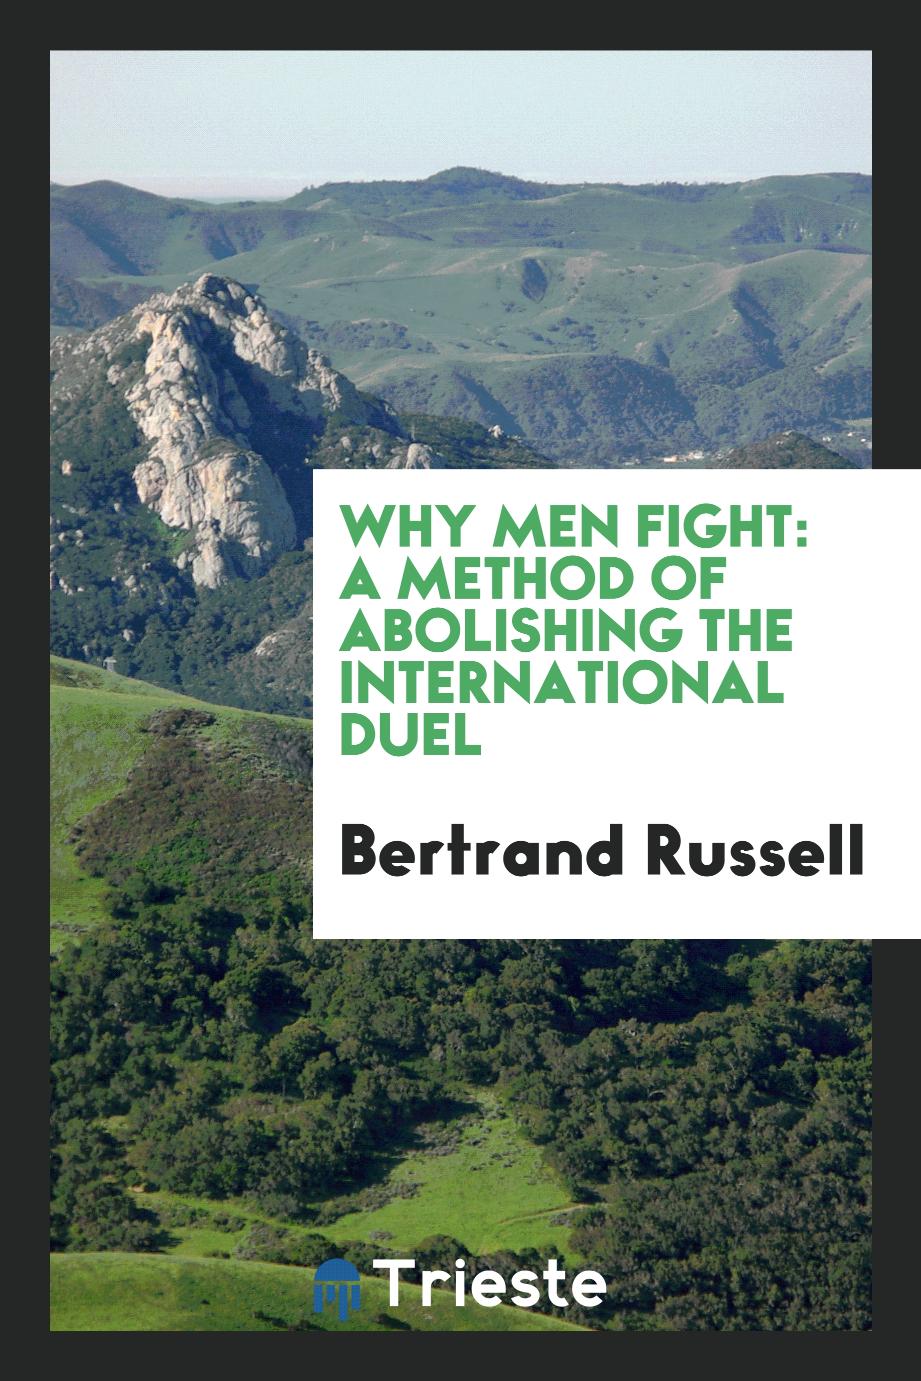 Why men fight: a method of abolishing the international duel